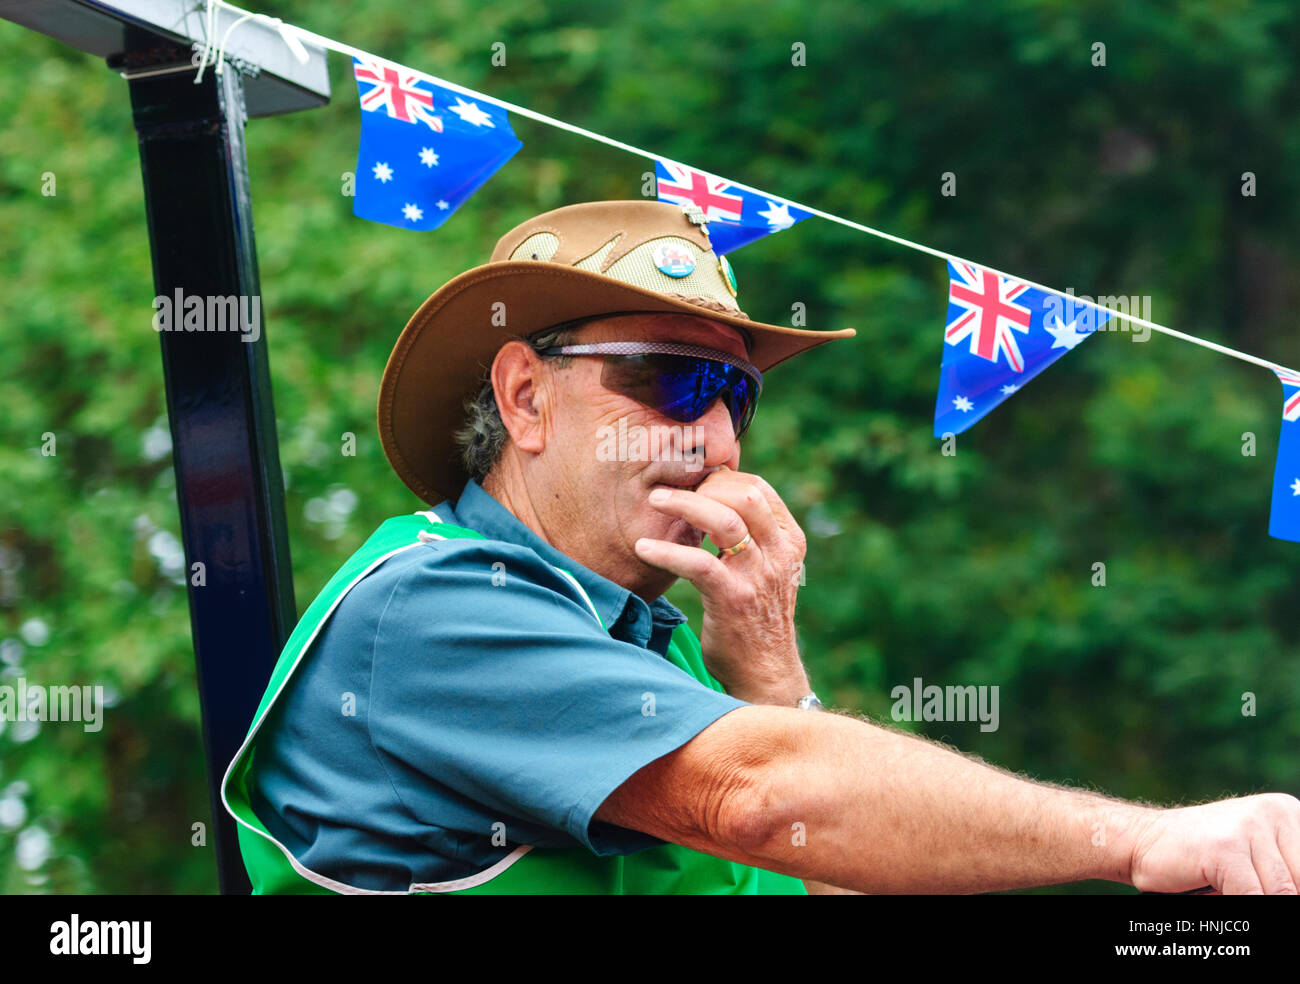 Pensive man with a hat and sunglasses participating in the Australia Day 2017 parade, Berrima, New South Wales, NSW, Australia Stock Photo